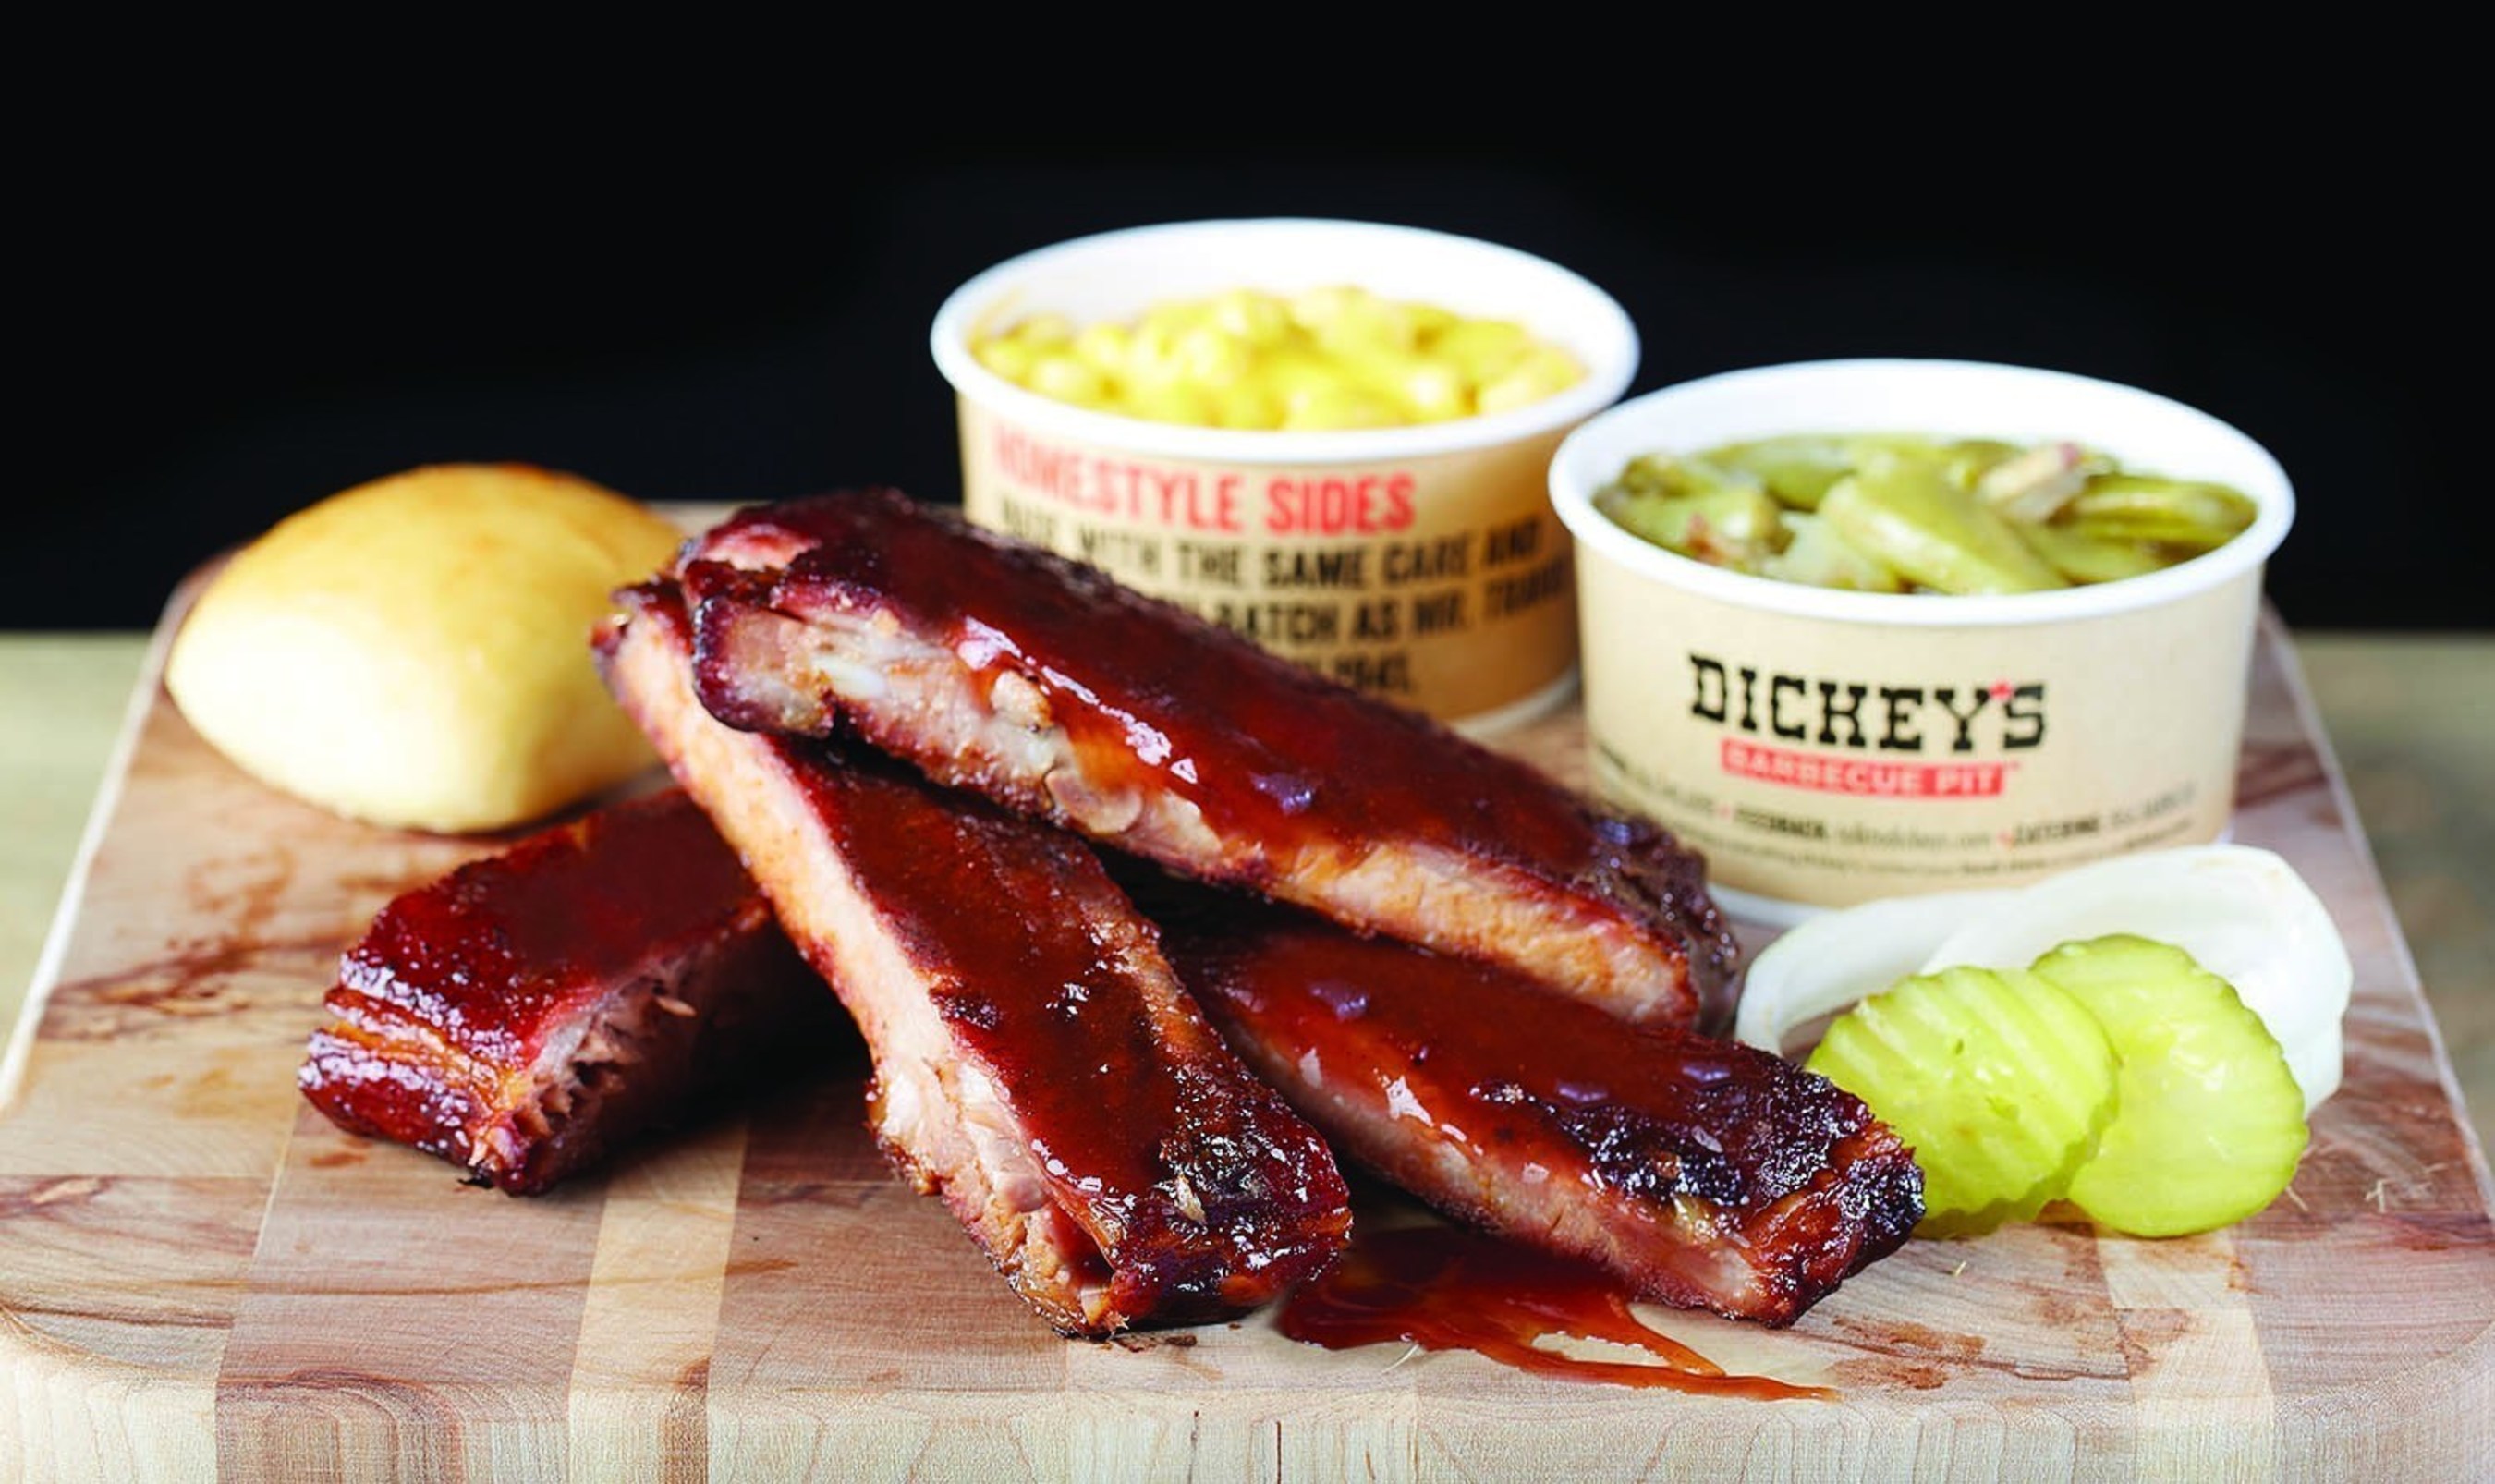 Six new Dickey's Barbecue Pit locations will soon arrive in Pennsylvania